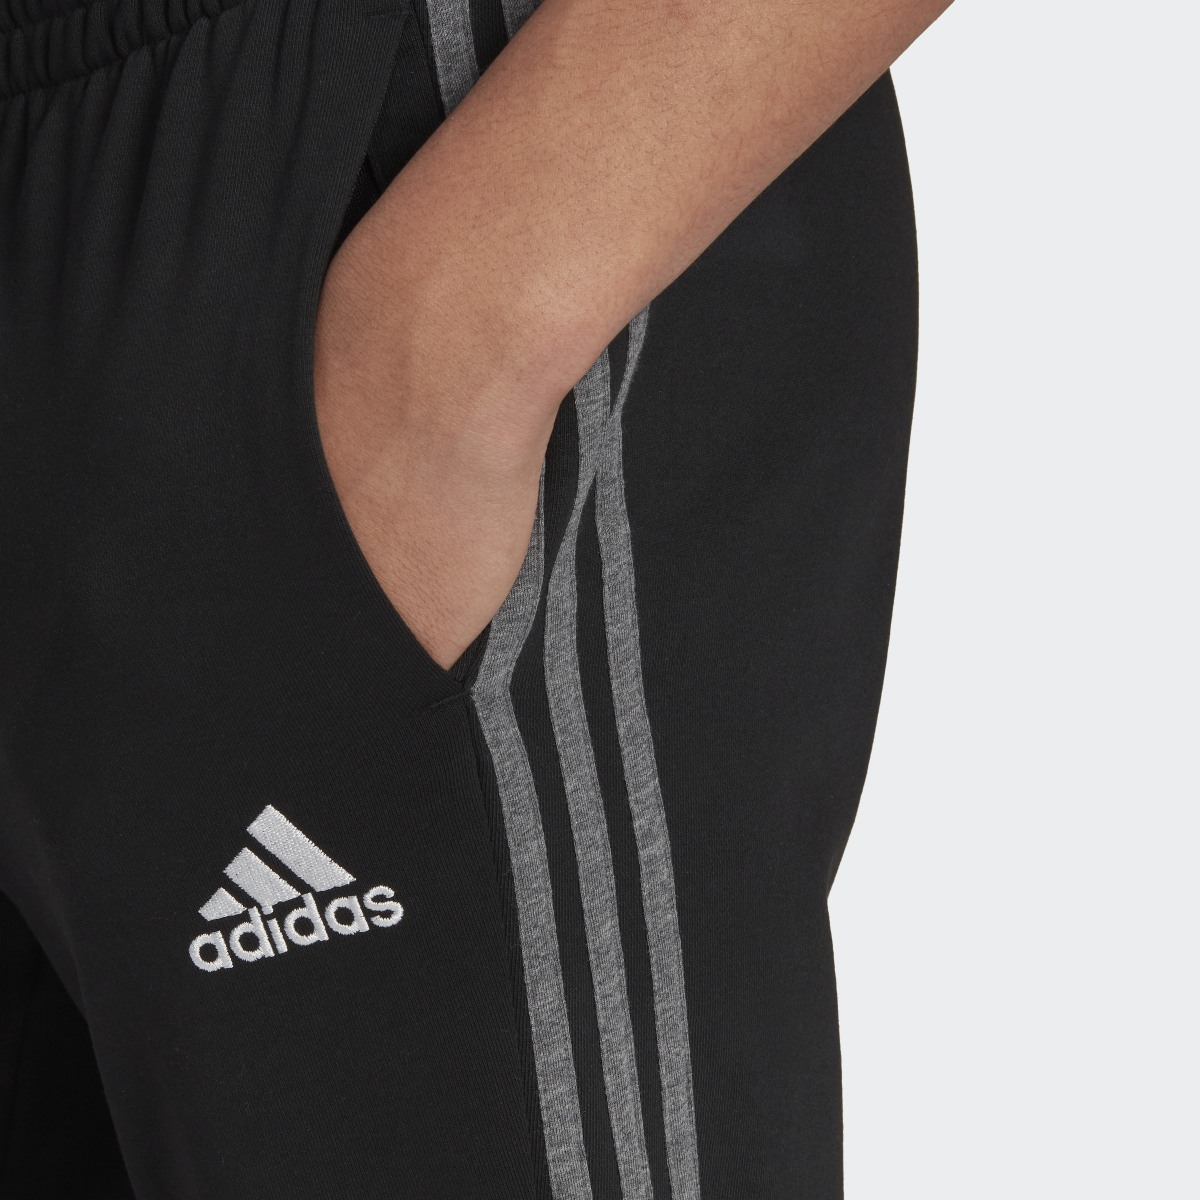 Adidas Essentials Mélange French Terry Pants. 5